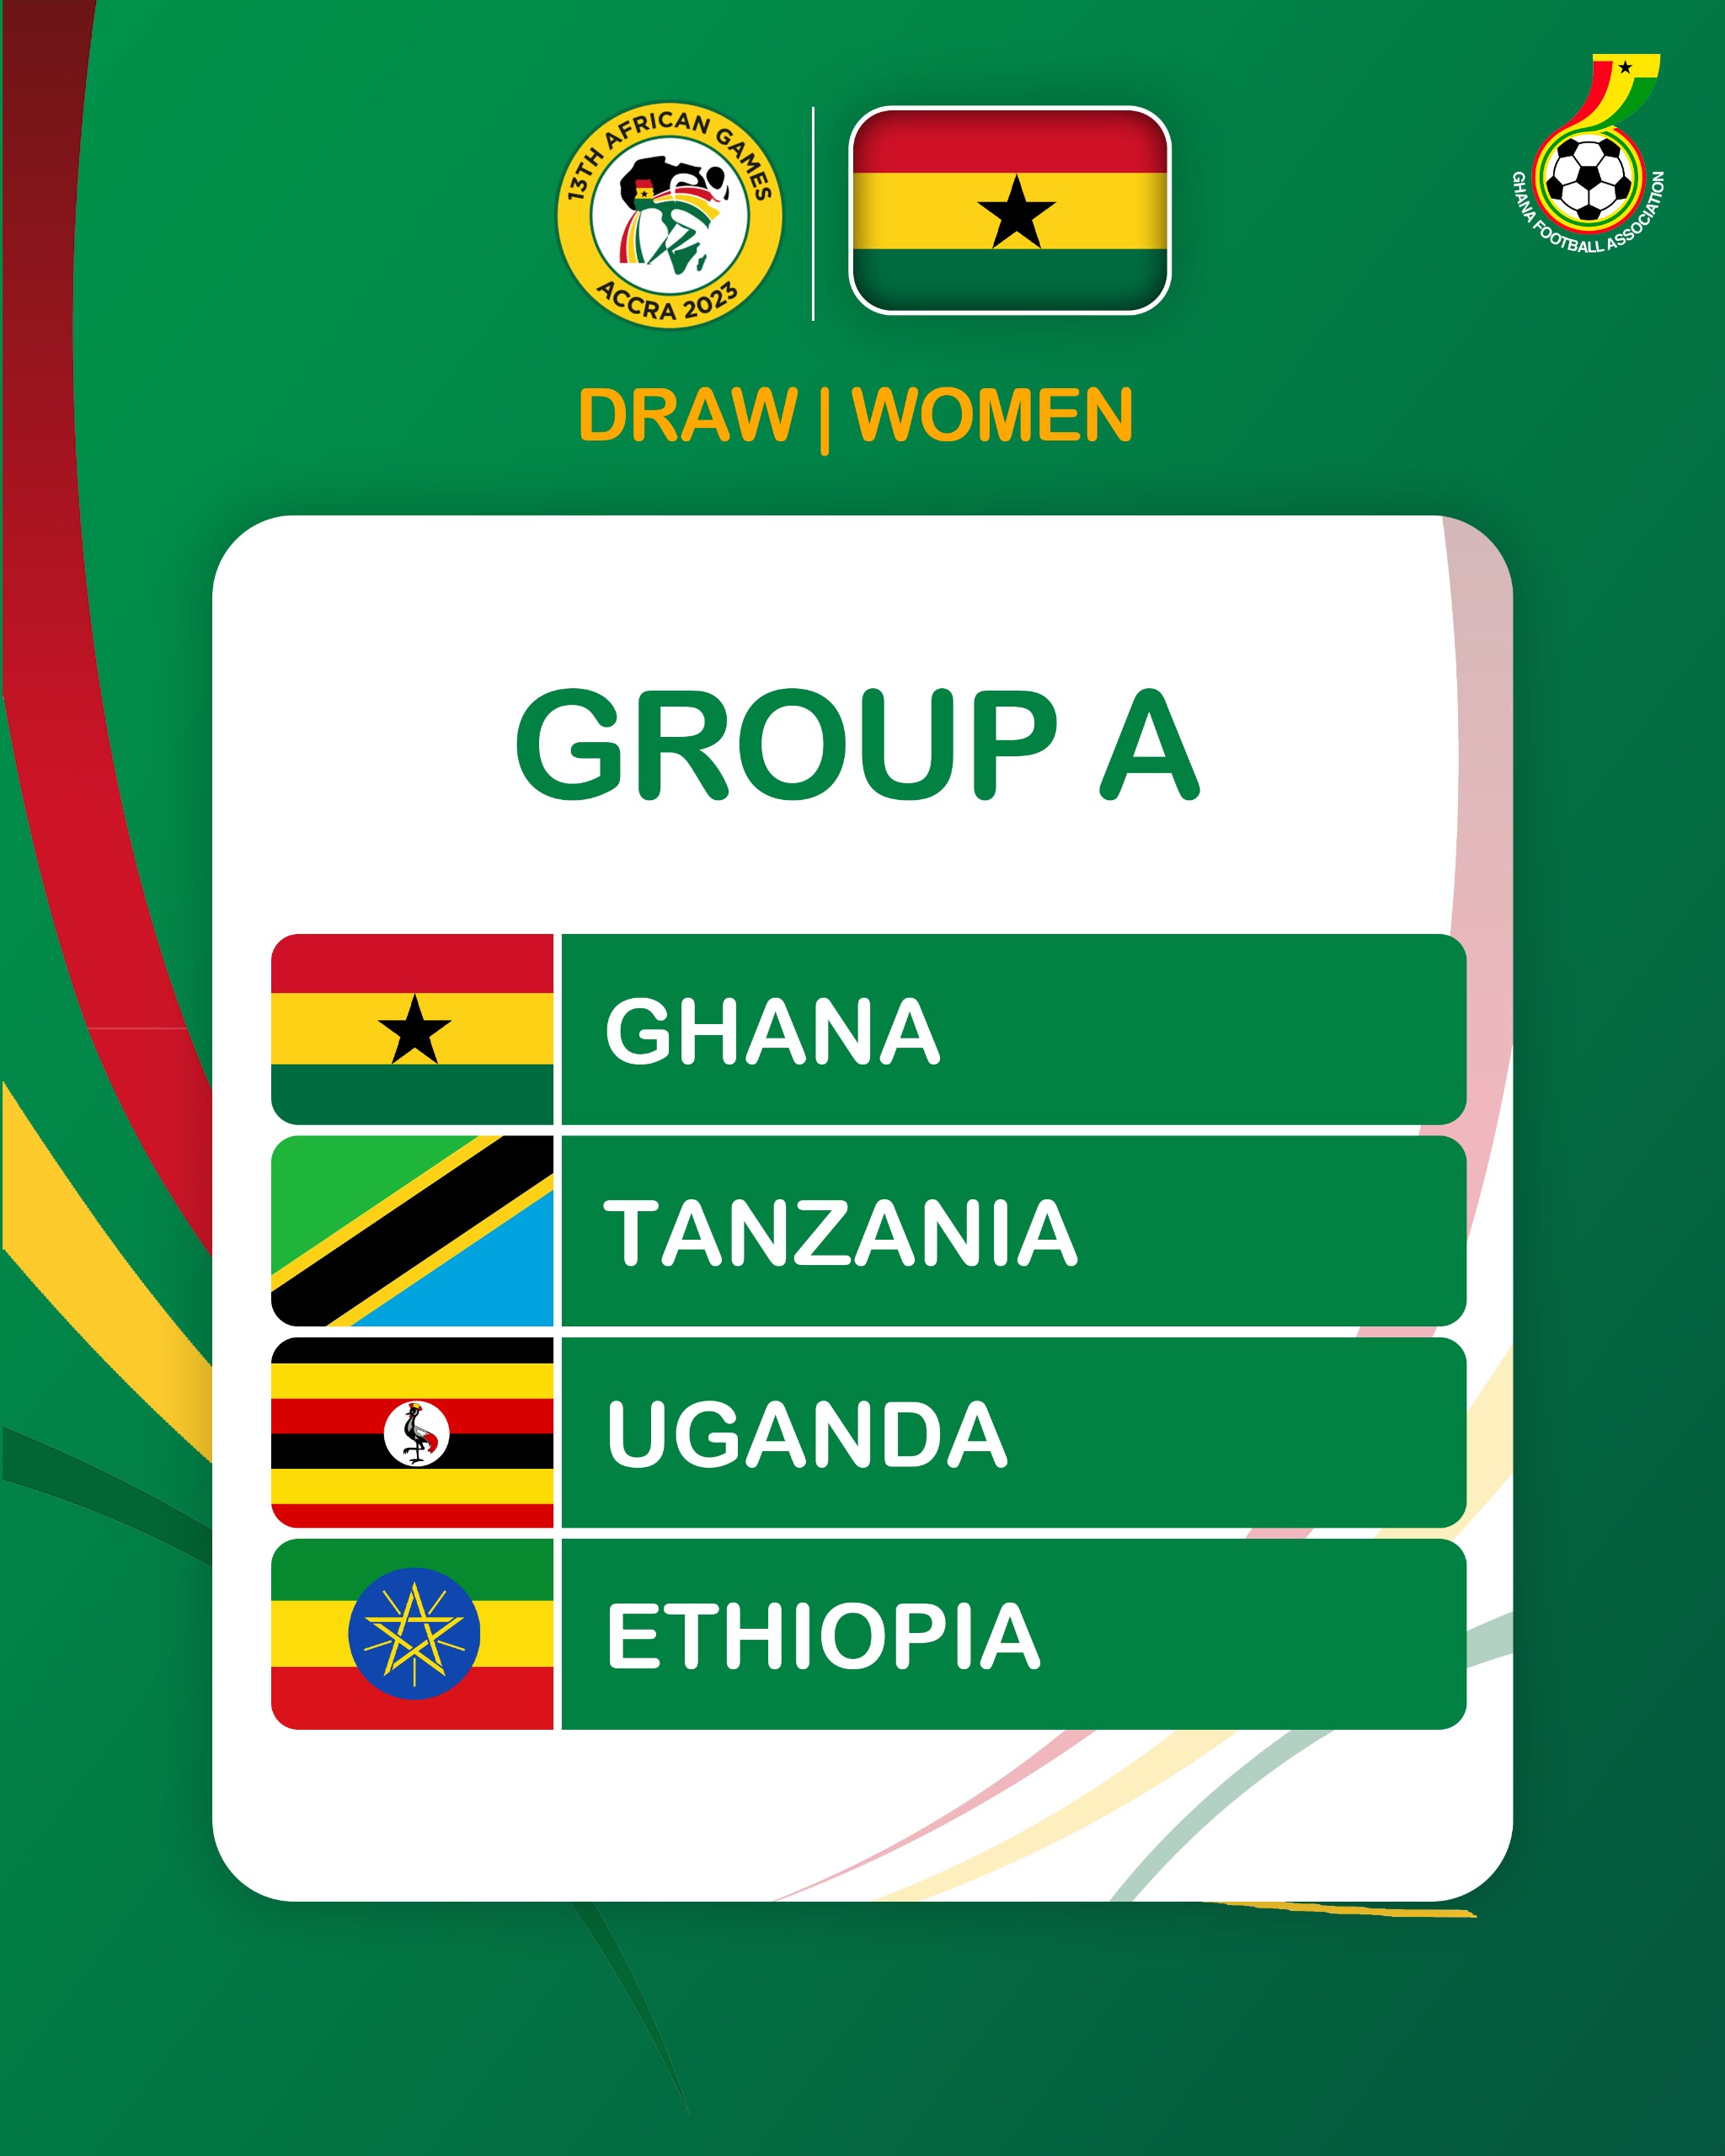 13th African Games: Black Princesses face Uganda, Tanzania and Ethiopia in group A